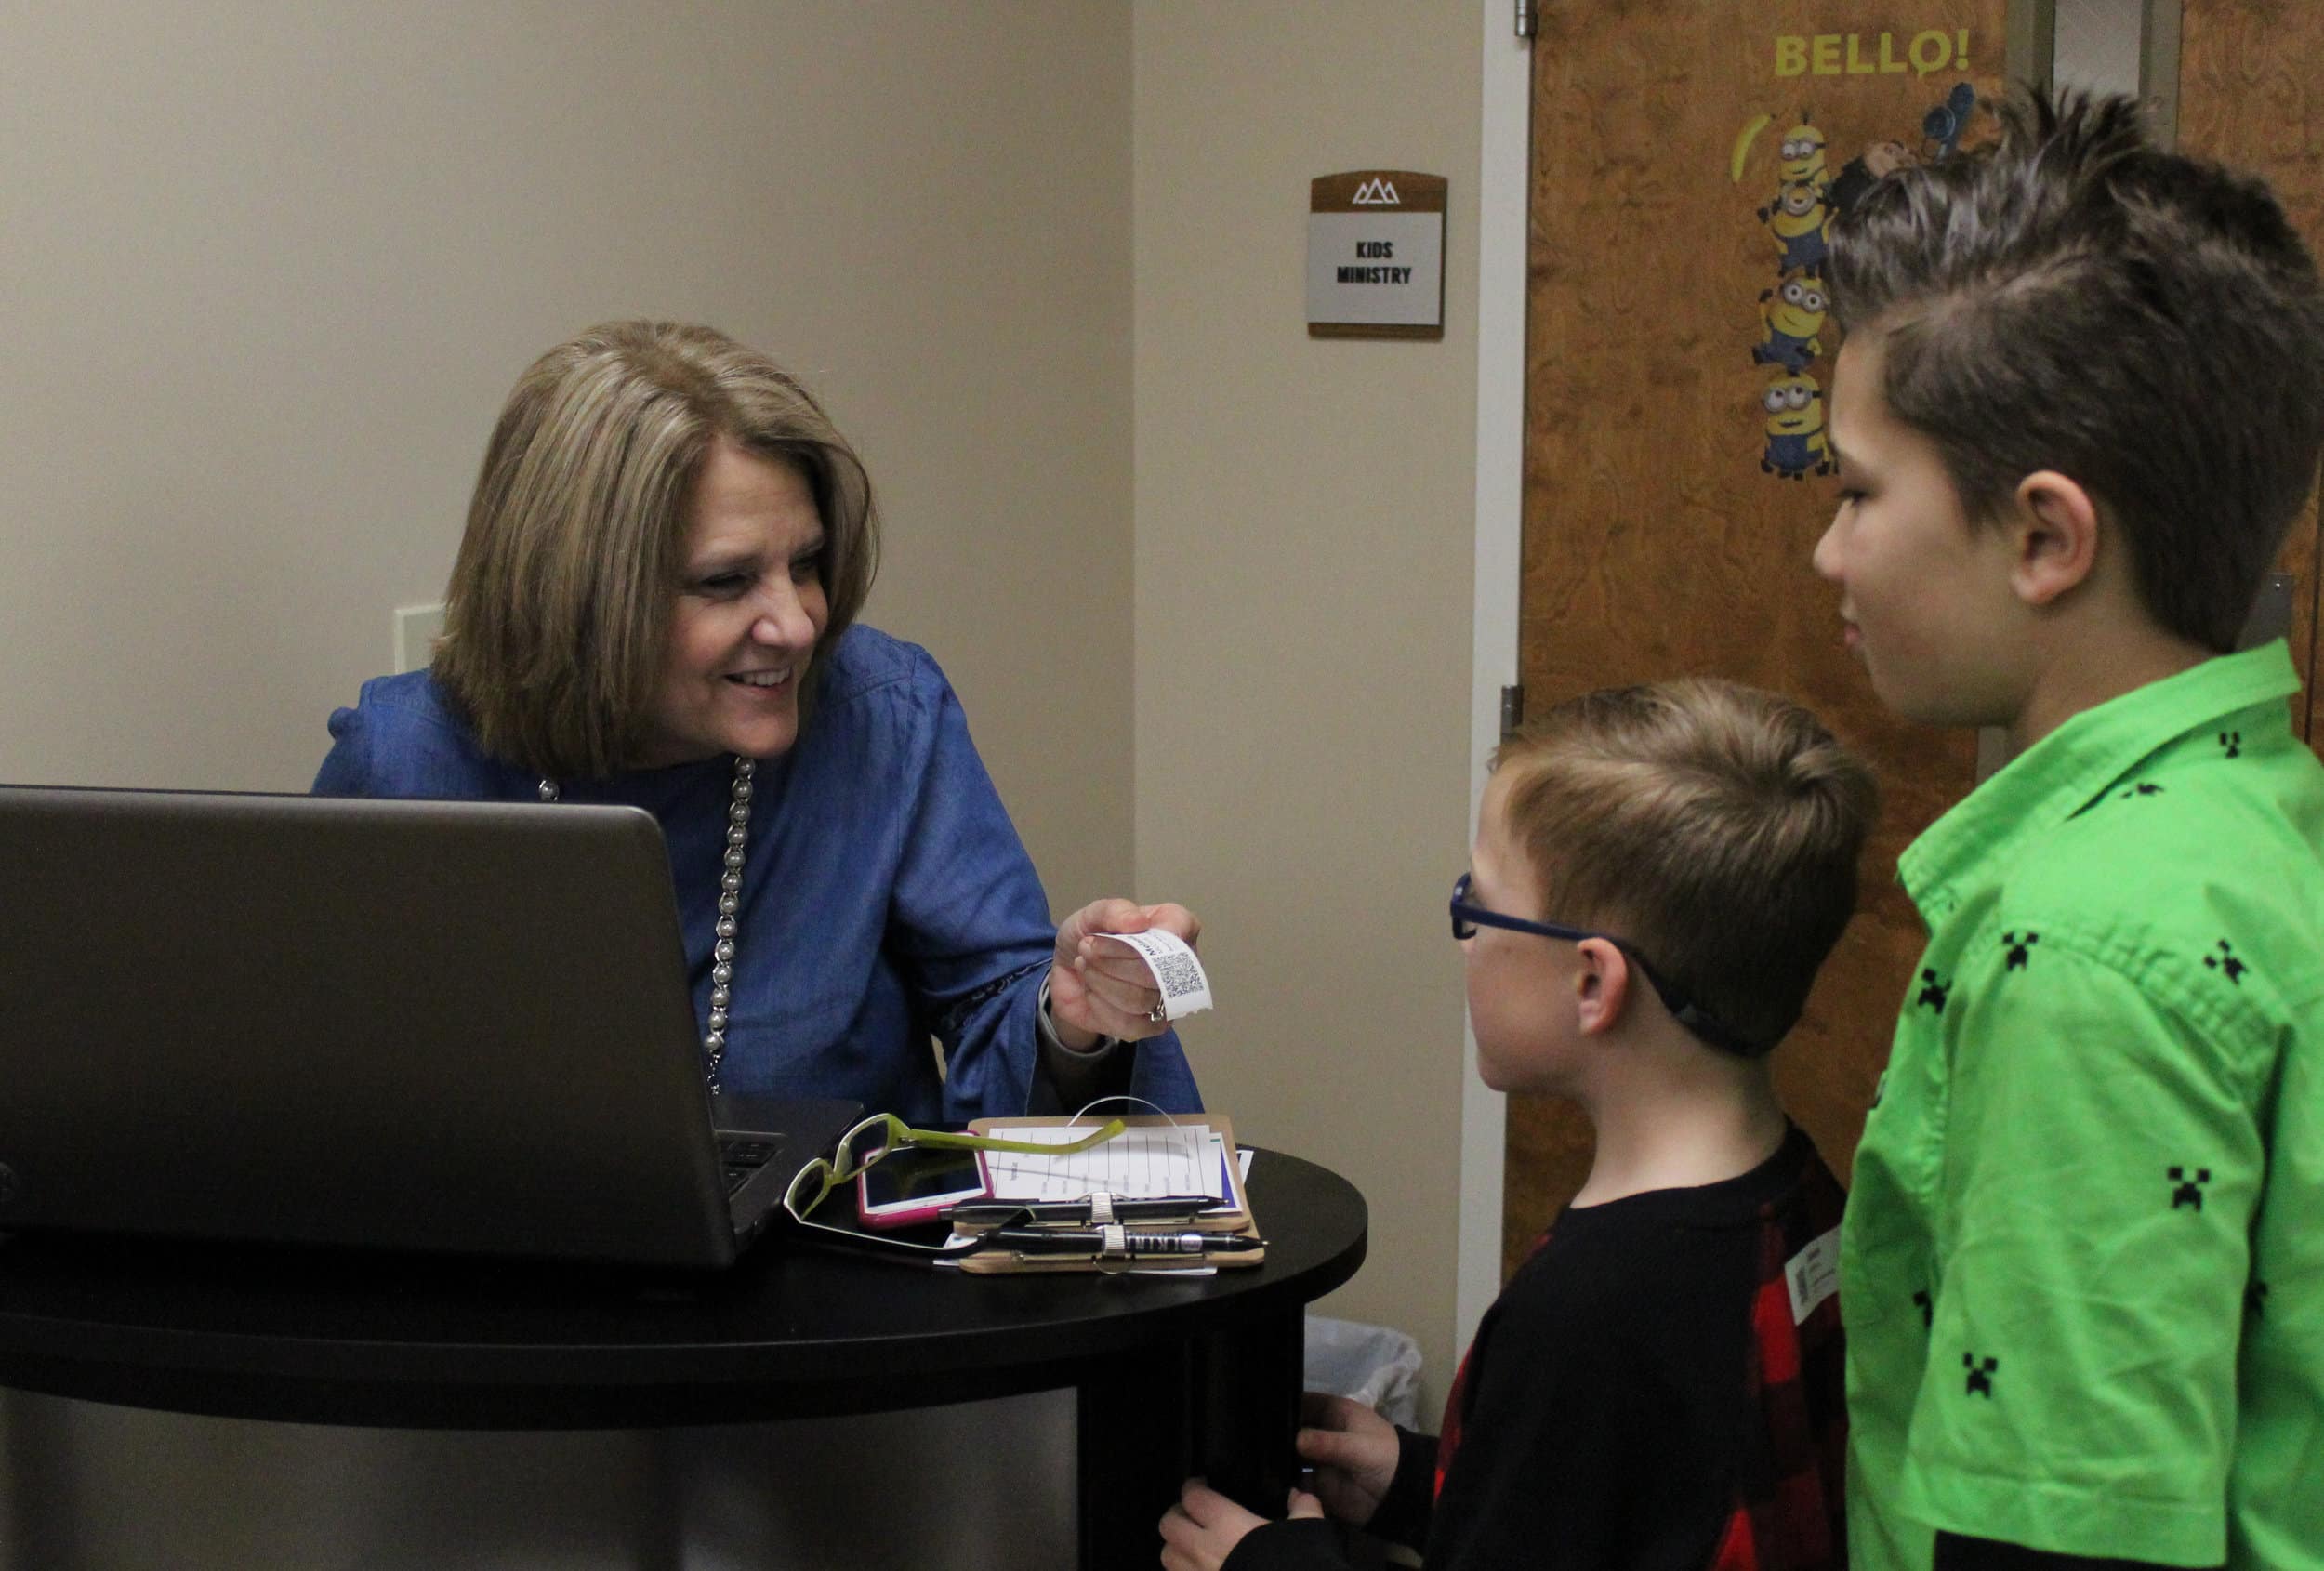 On Sunday mornings, children from ages one to 12 are electronically checked in specifically into their class according to age. Here, LeeAnn Streetman, the childrens pastors wife, welcomes our youth Jaxson McManus and Brian Fowler.